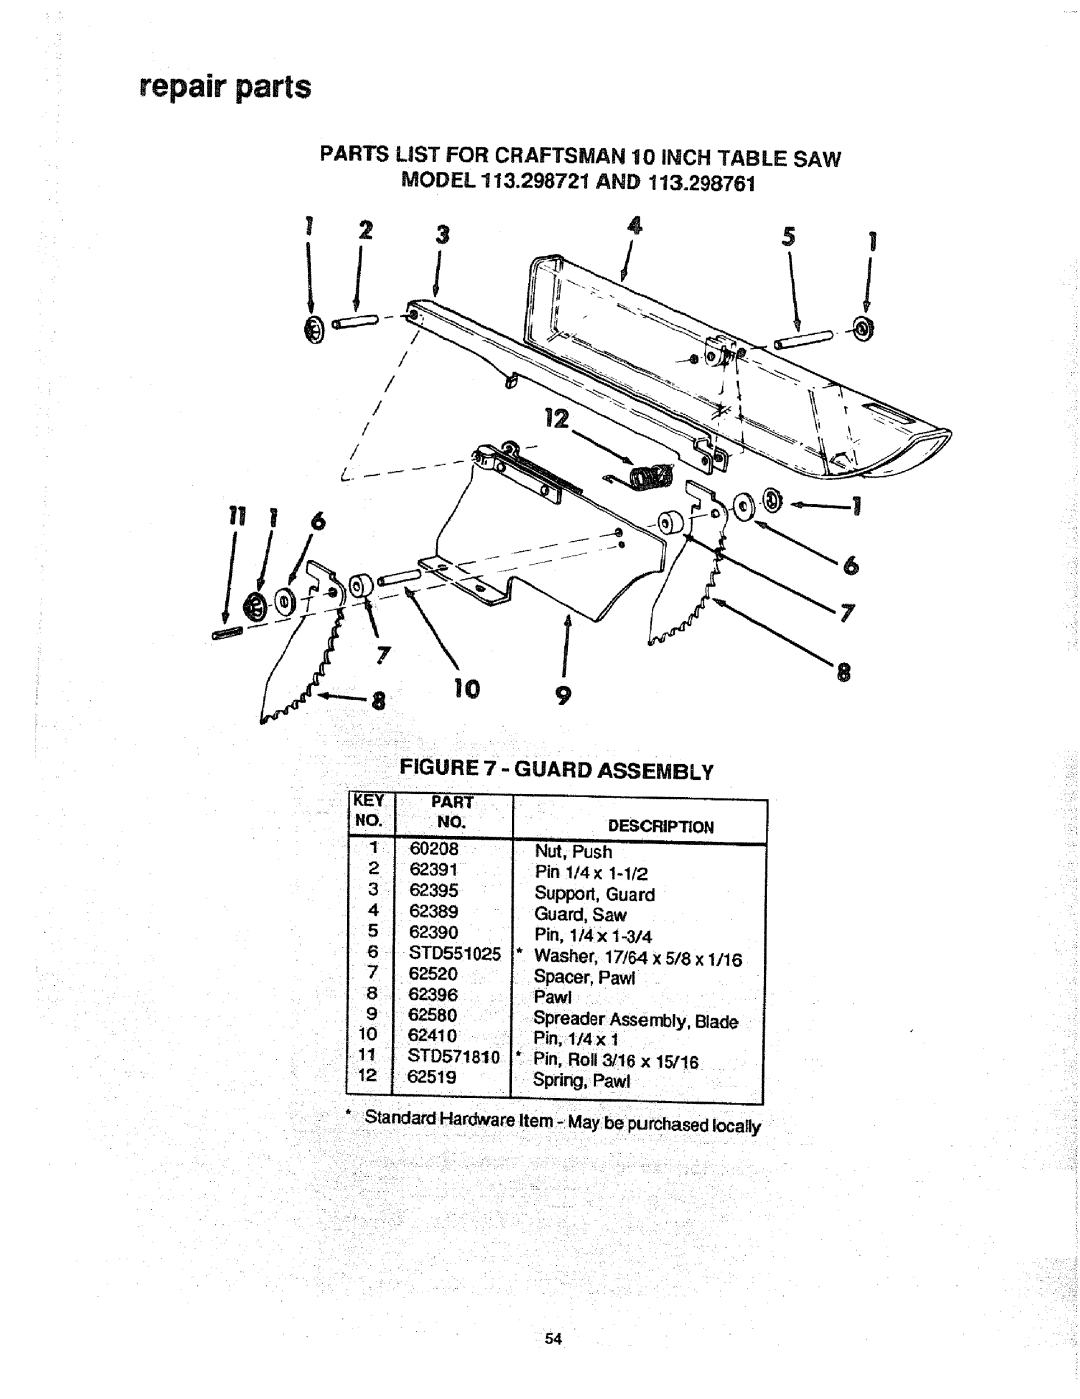 Craftsman manual Guard Assembly, repair parts, PARTS LiST FOR CRAFTSMAN 10 INCH TABLE SAW MODEL 113.298721 AND, Part 